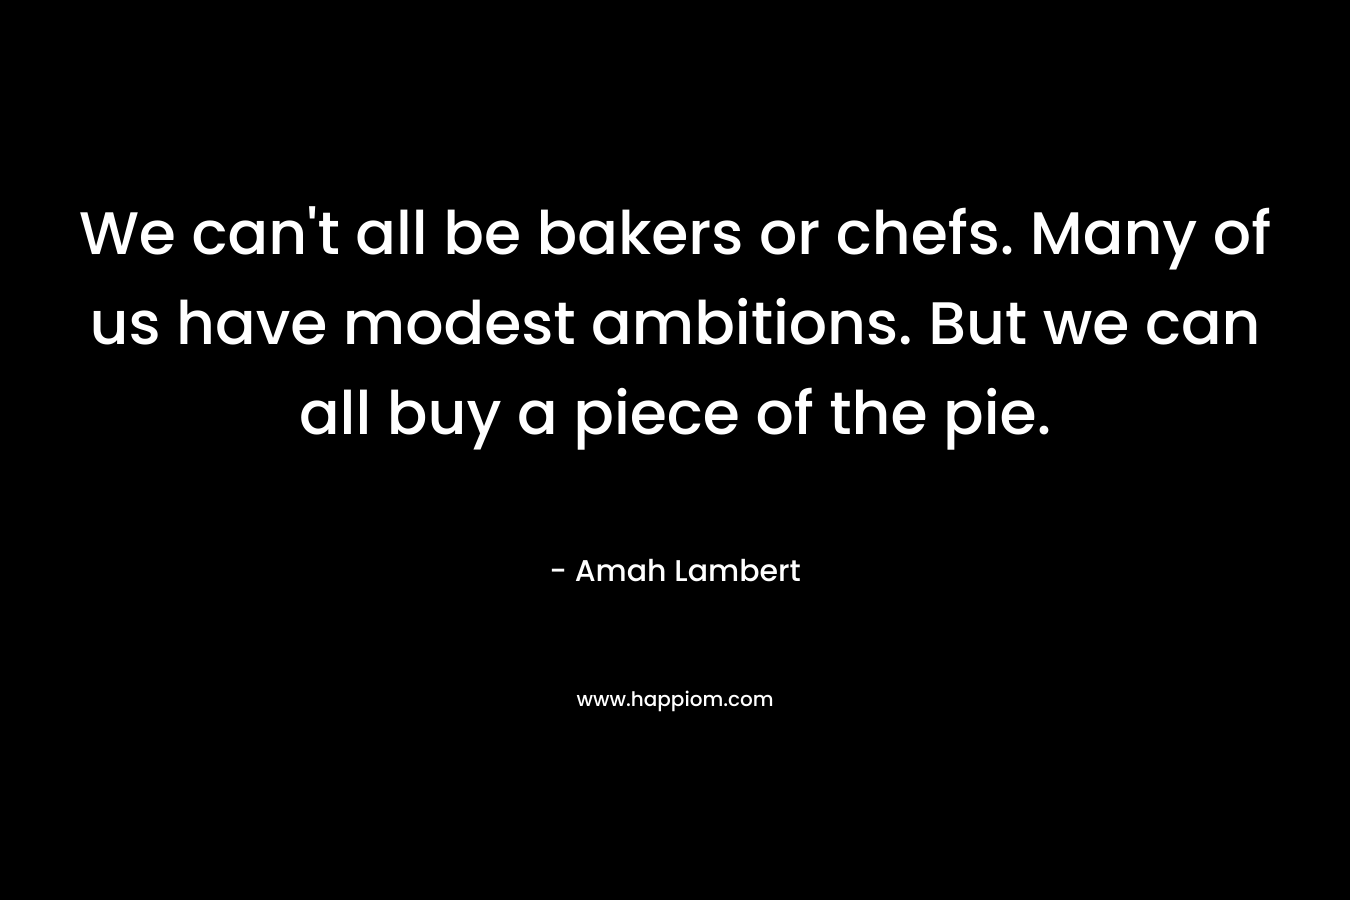 We can’t all be bakers or chefs. Many of us have modest ambitions. But we can all buy a piece of the pie. – Amah Lambert